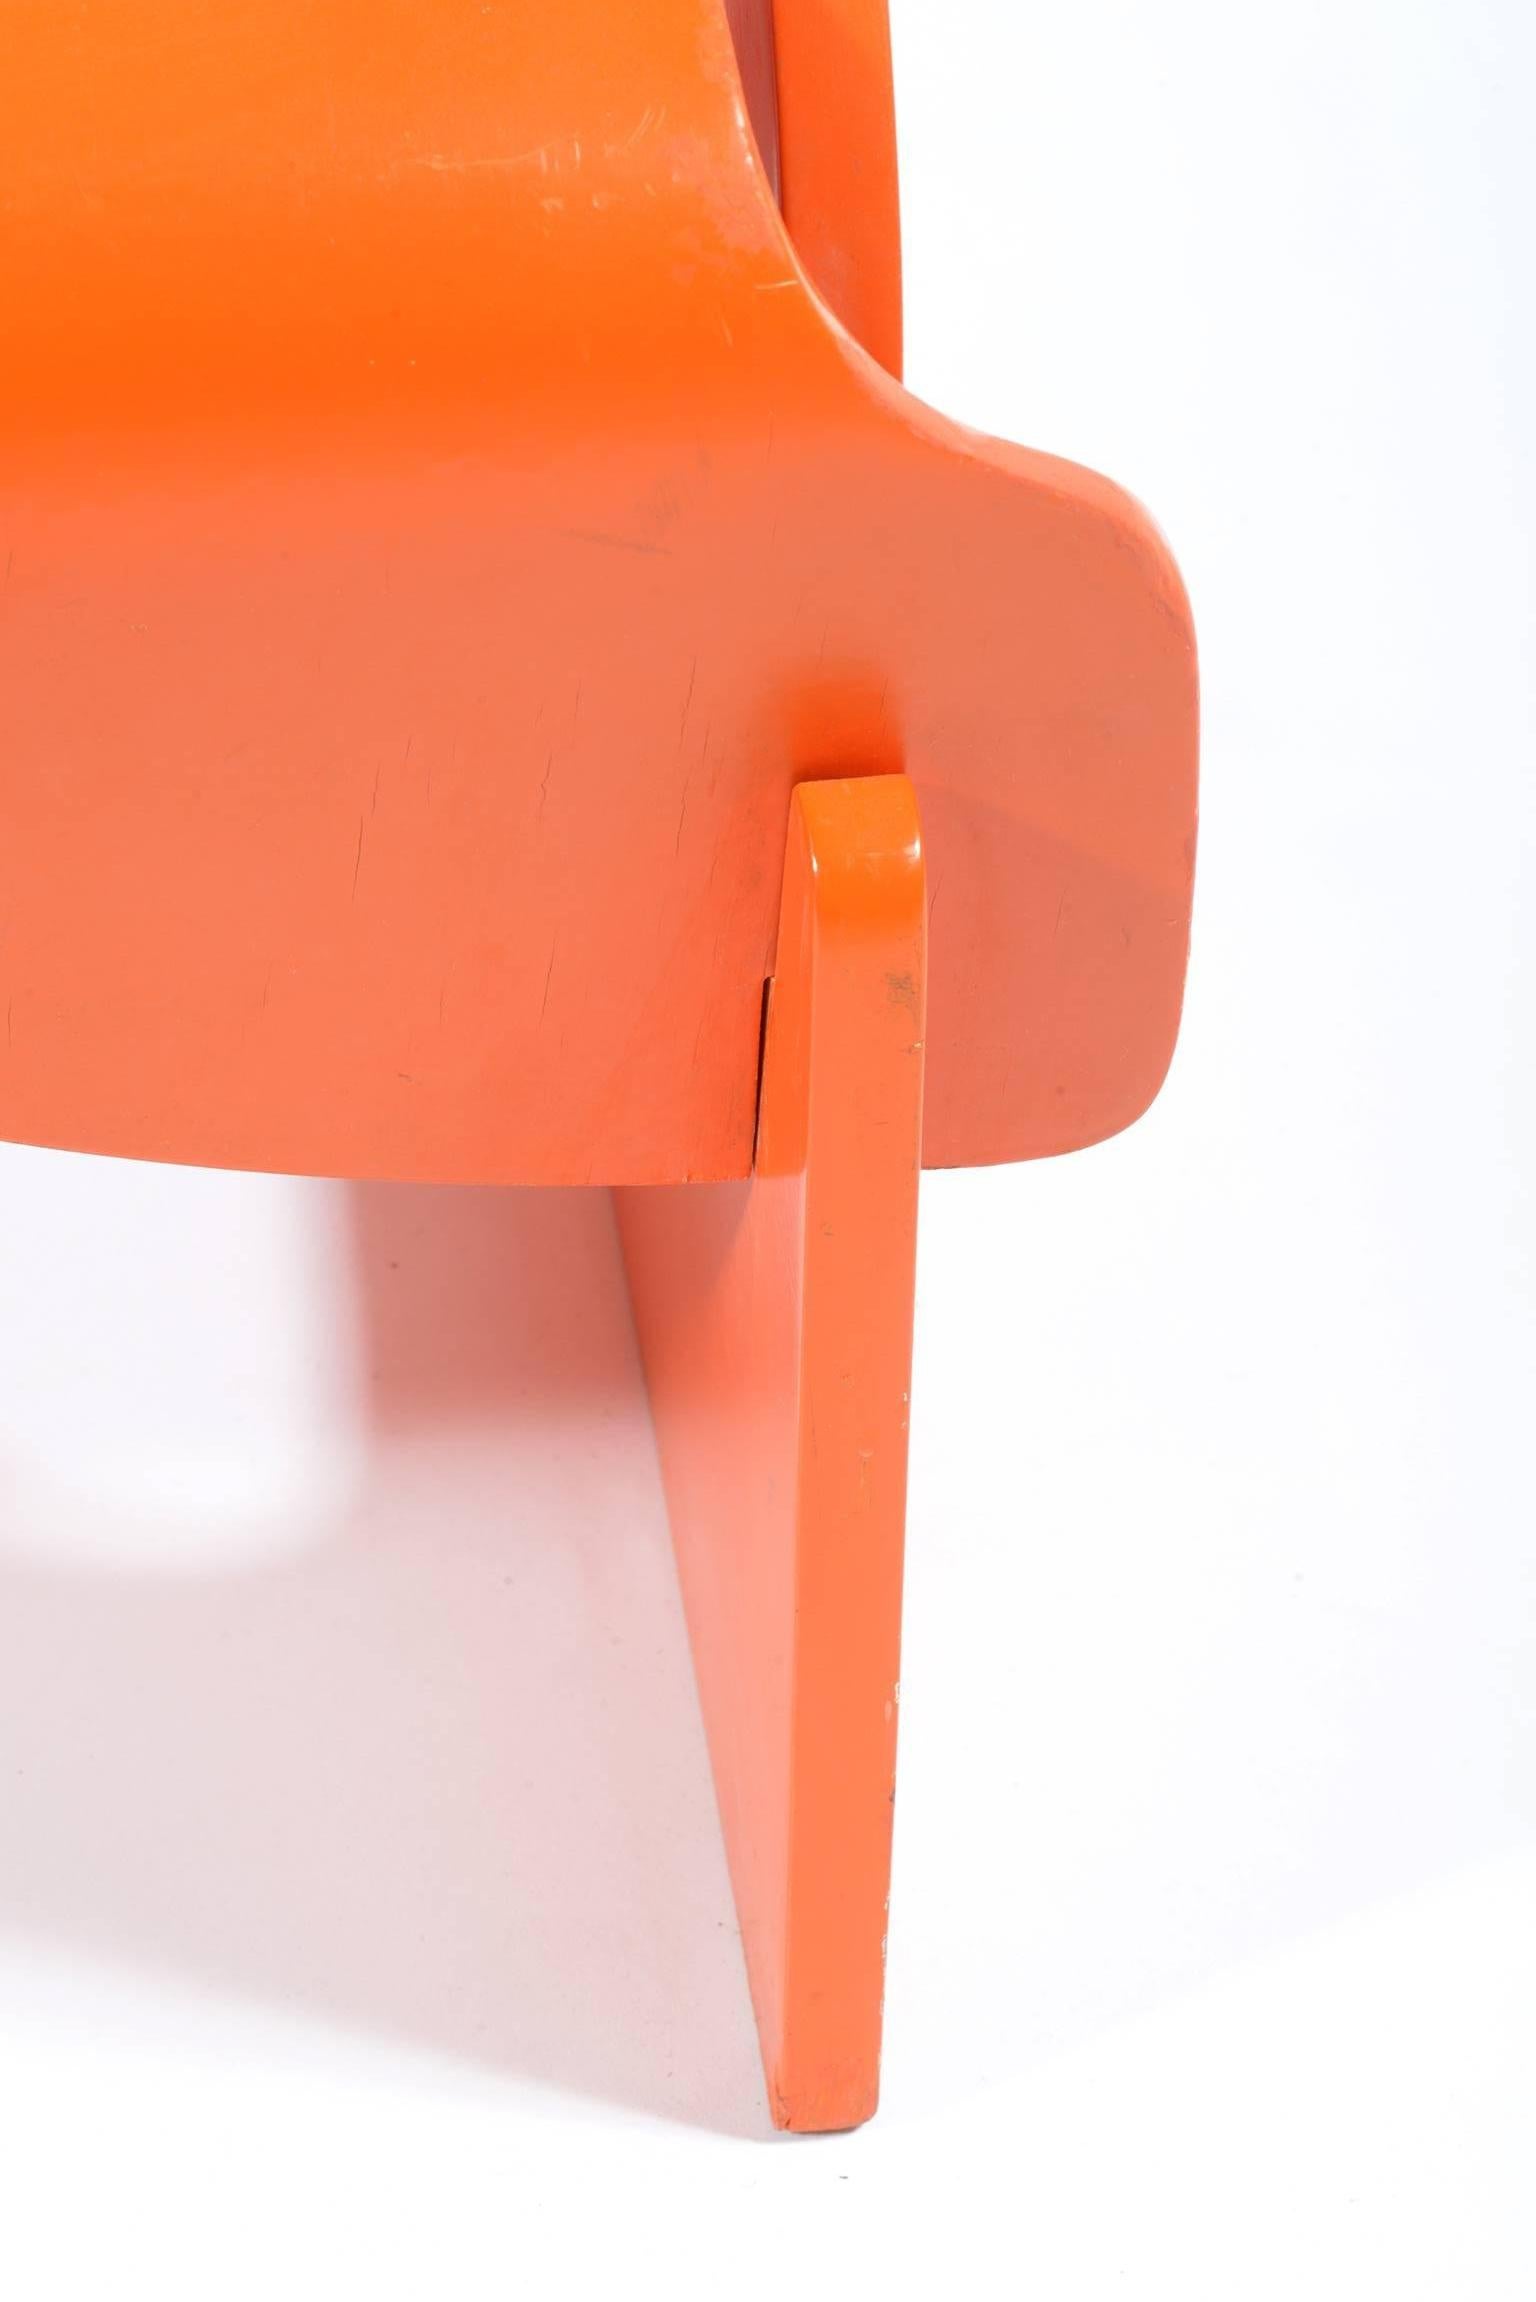 Iconic Mid-Century Orange Armchair by Joe Colombo for Kartell 3